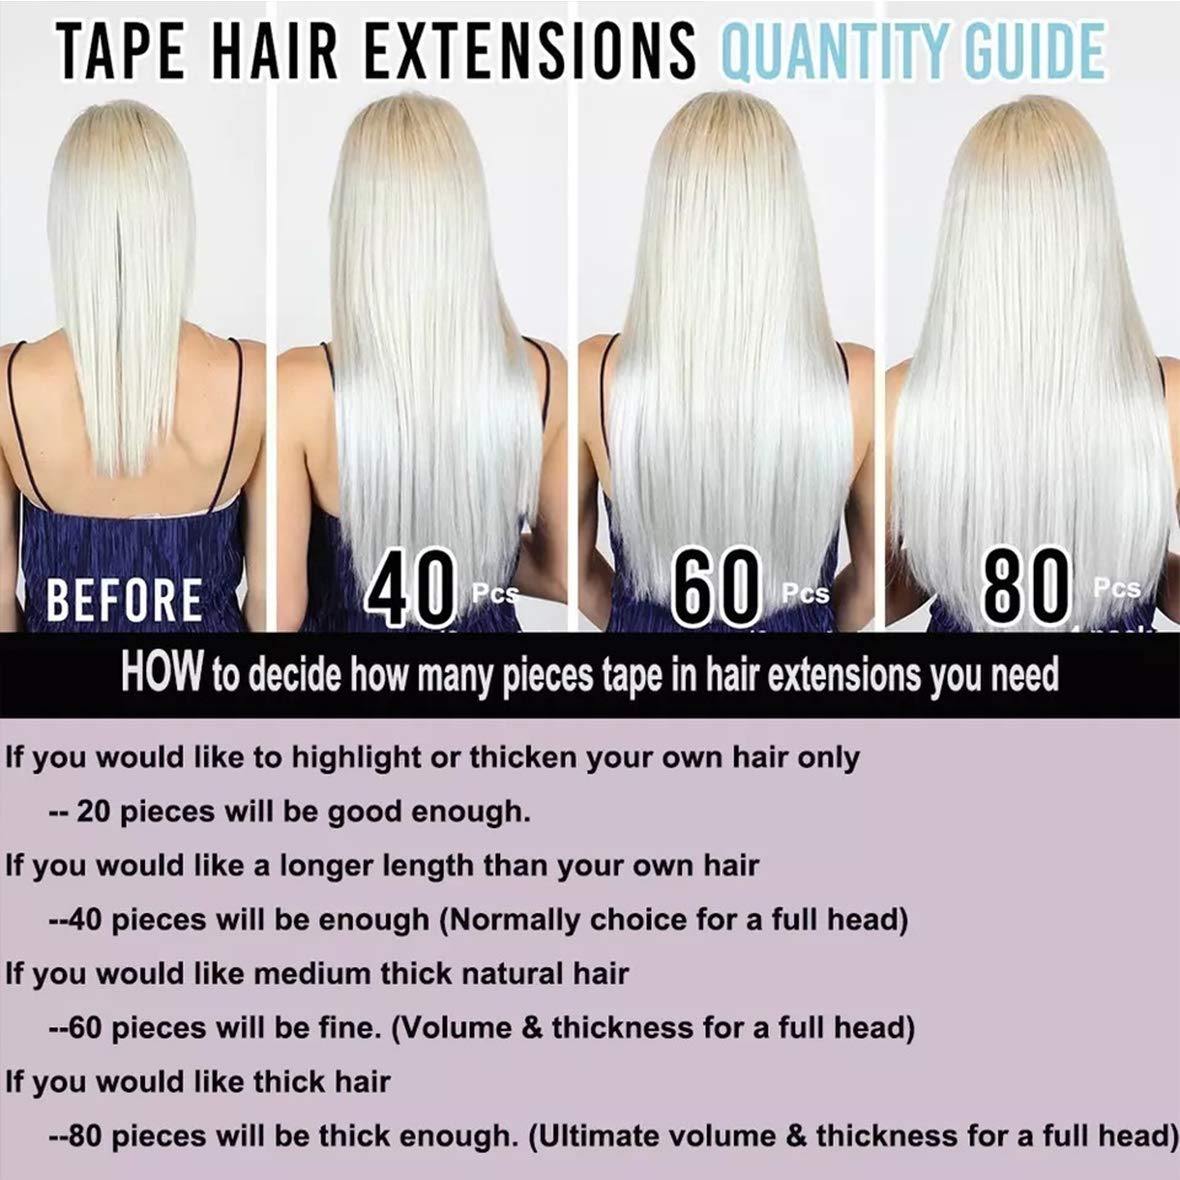 Tape in Hair Extensions Human Hair Golden Brown to Platinum Blonde T#12-60 Tape Natural Straight Hair Extensions 50g - amellahair